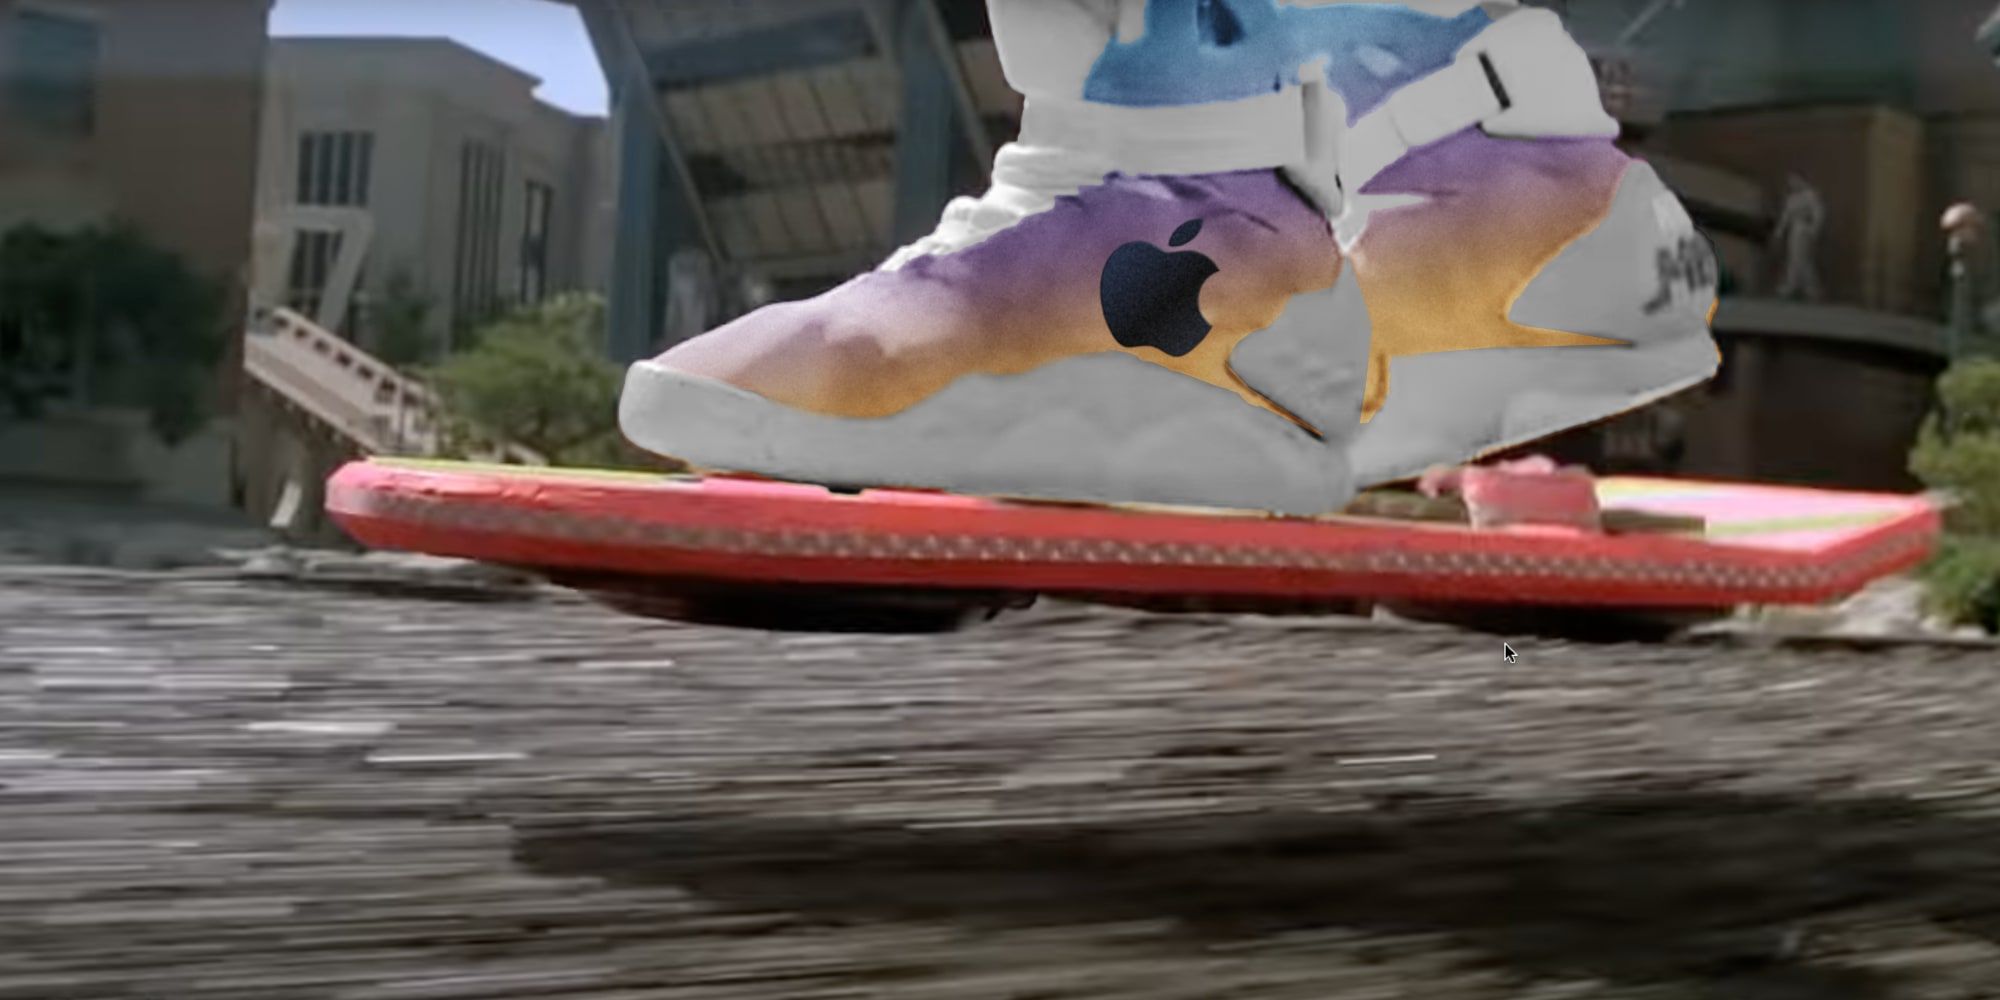 Apple Shoes Render Based On Back To The Future Self-Lacing